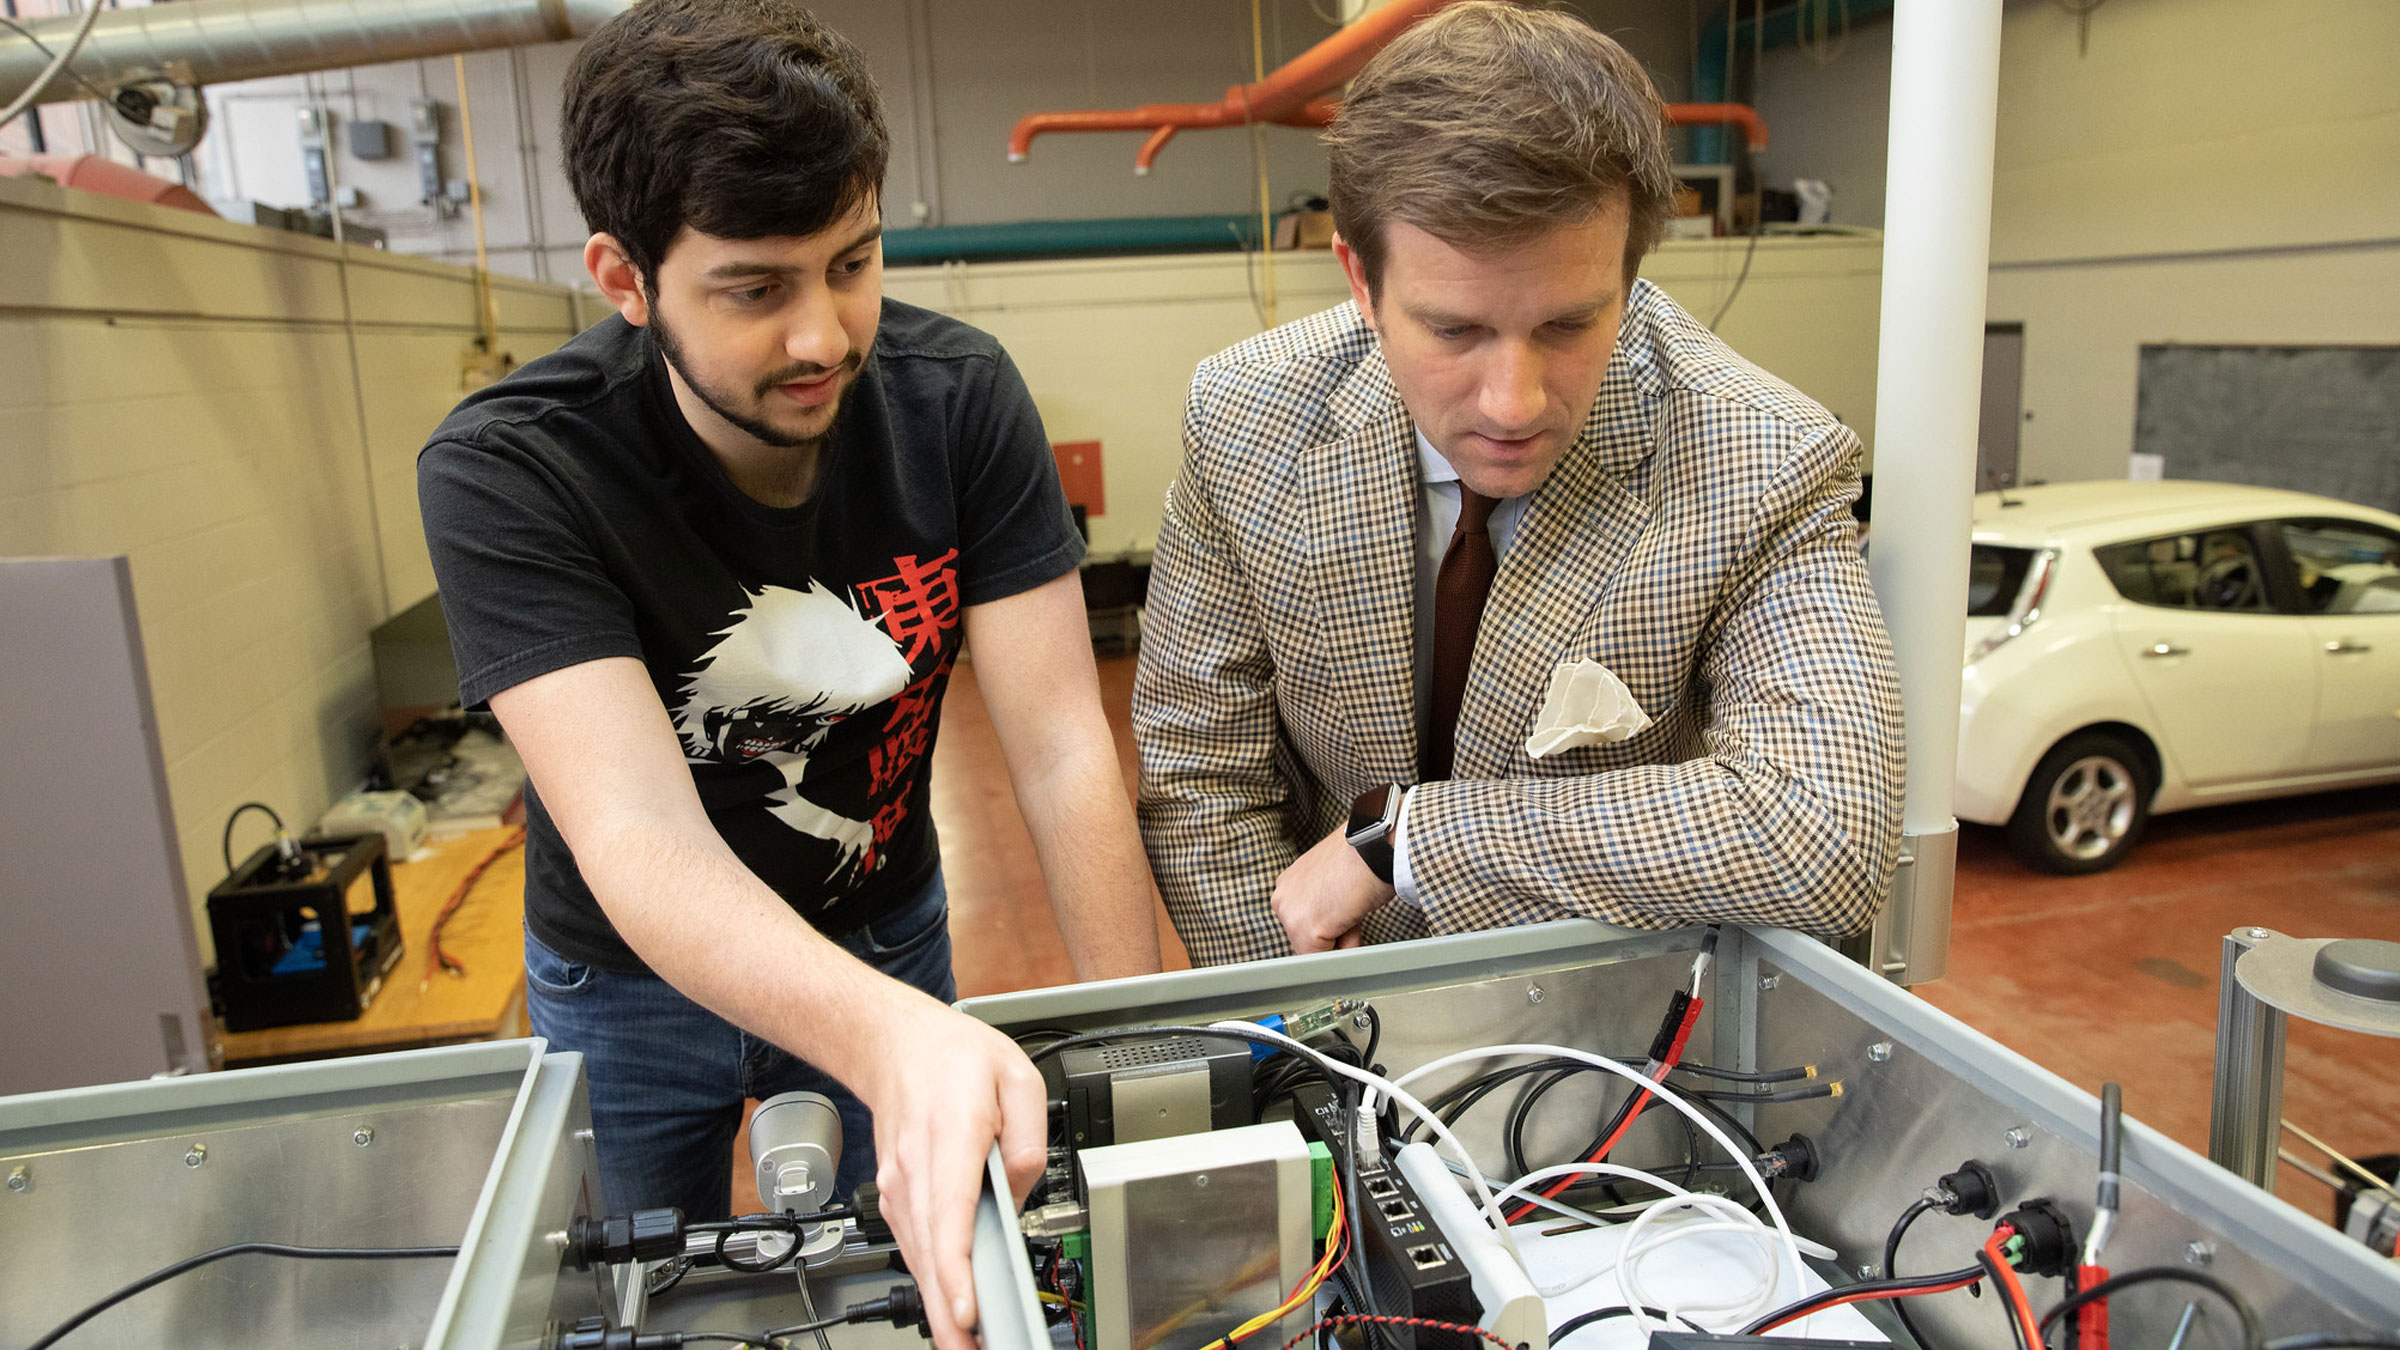 A University of Louisiana at Lafayette student and professor look at a control board while doing engineering research